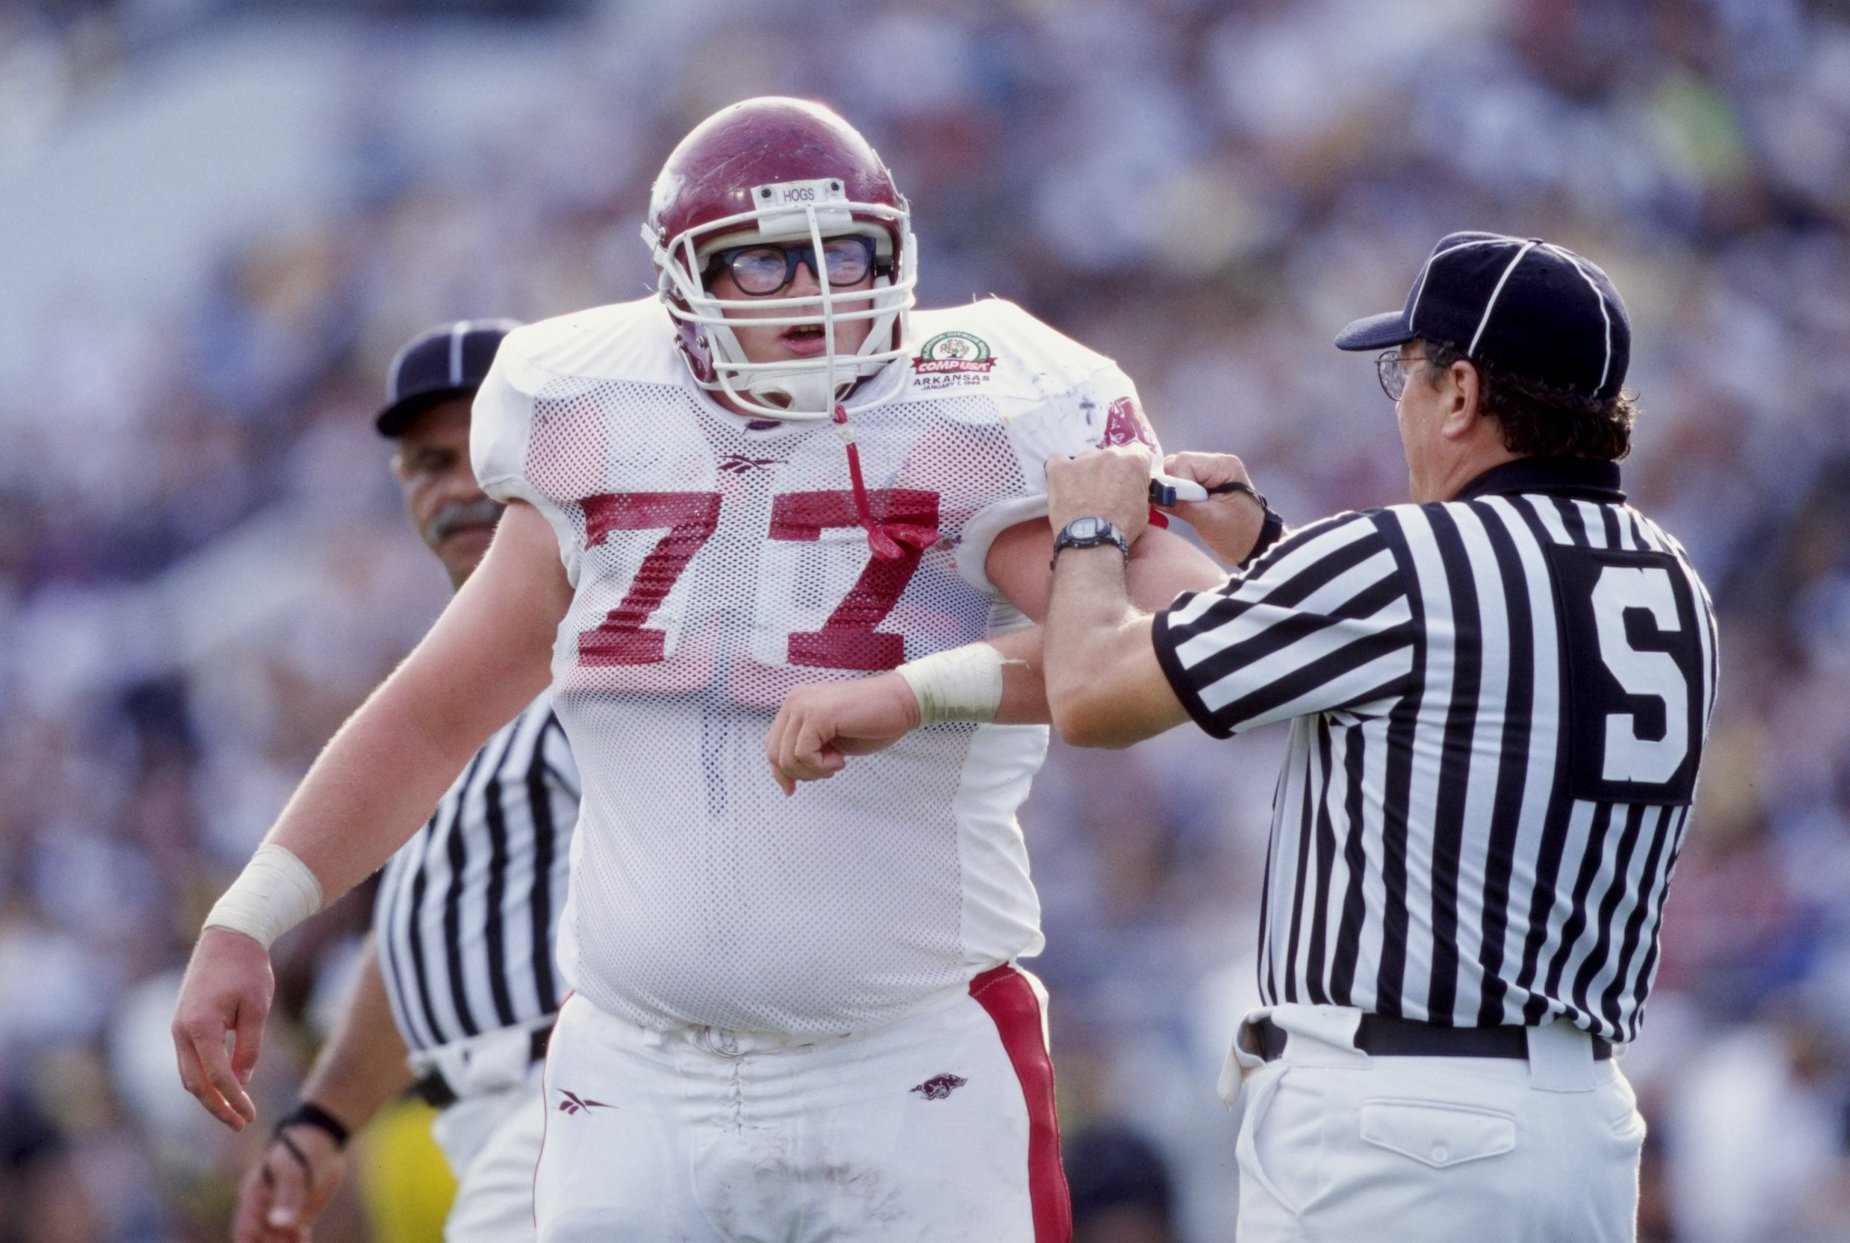 Brandon Burlsworth rose from walk-on to All-American at Arkansas, but tragically died before ever playing in the NFL.